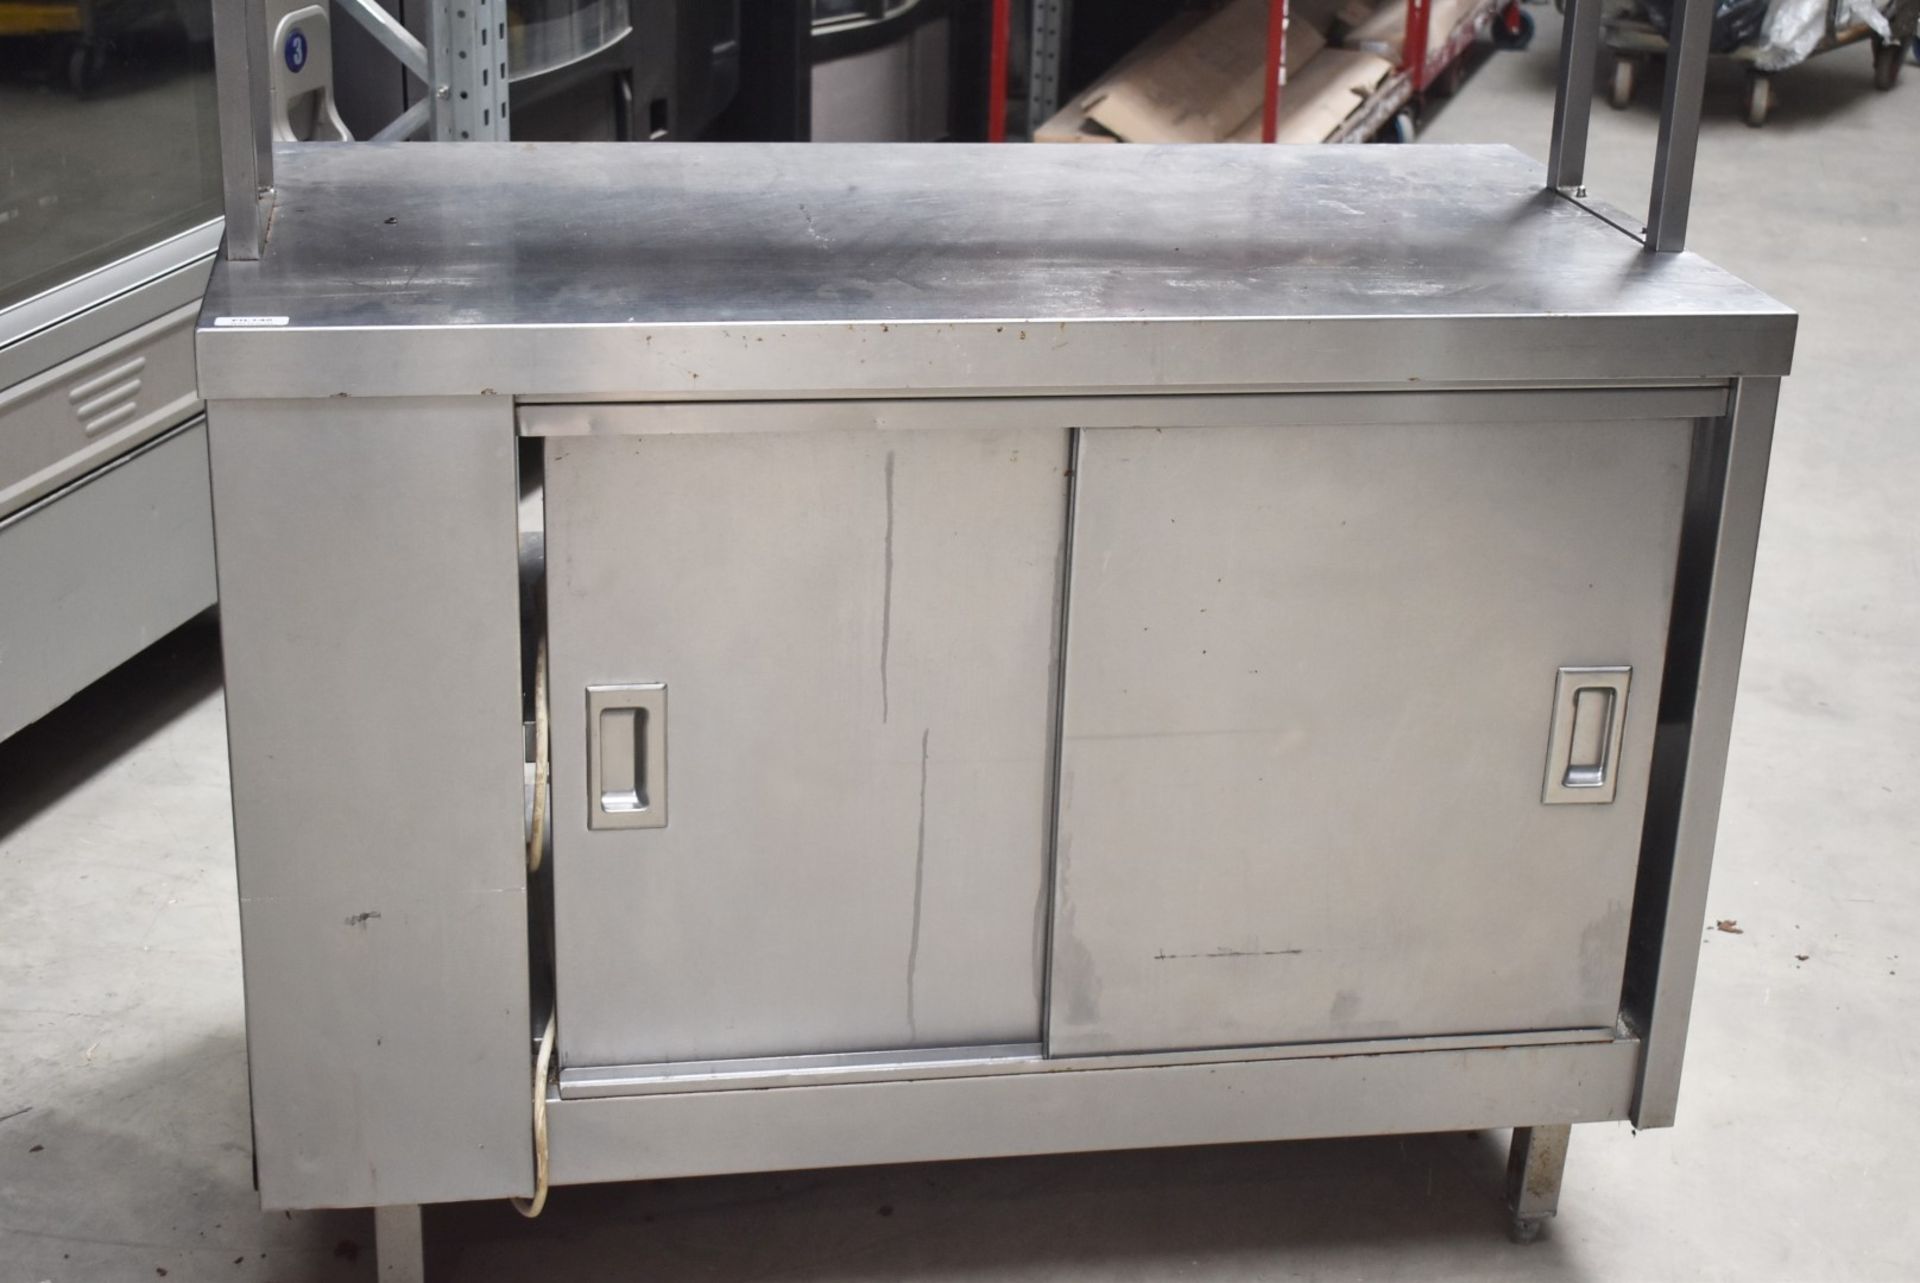 1 x Stainless Steel Hot Cabinet With Overhead Heated Passthrough Shelves and Order Ticket Rail - Image 2 of 11